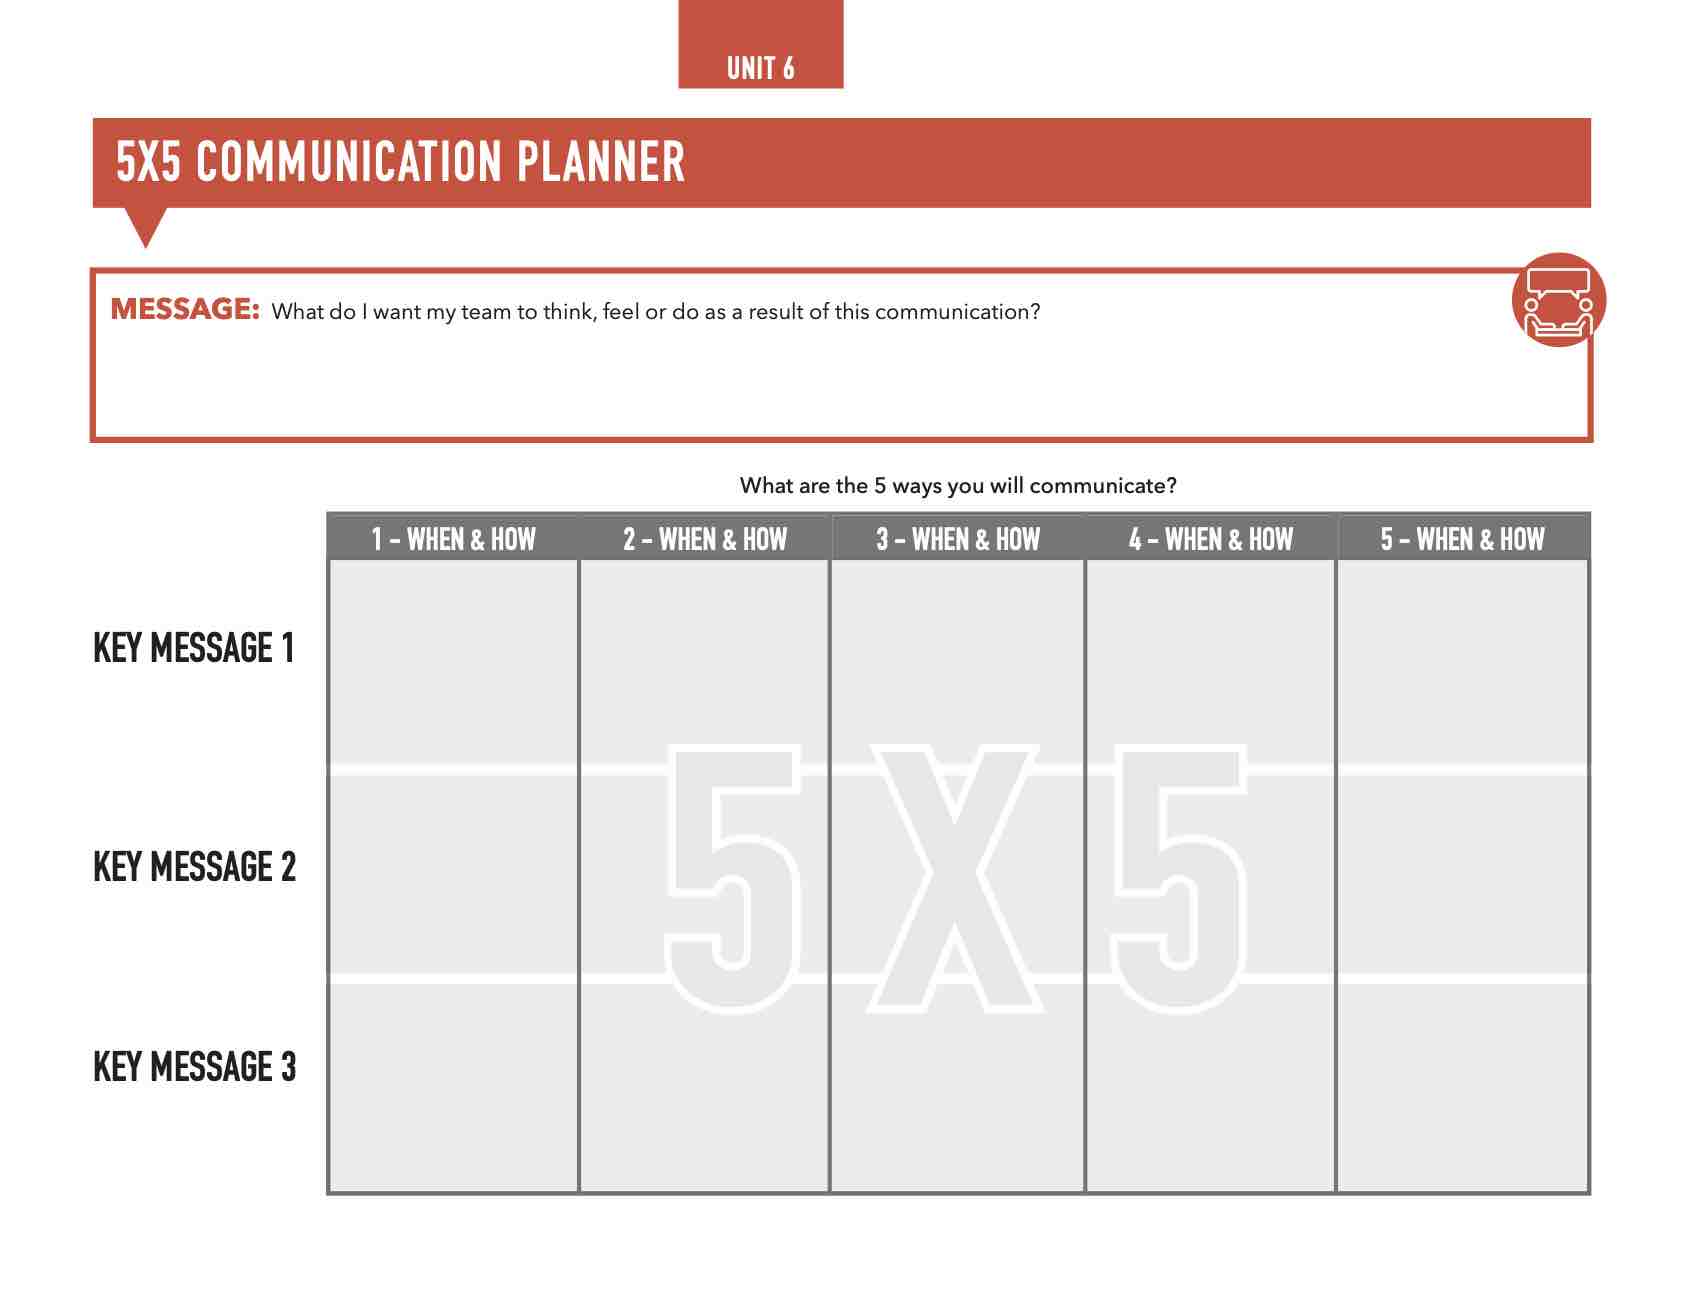 How to Build a 5x5 Communication Plan